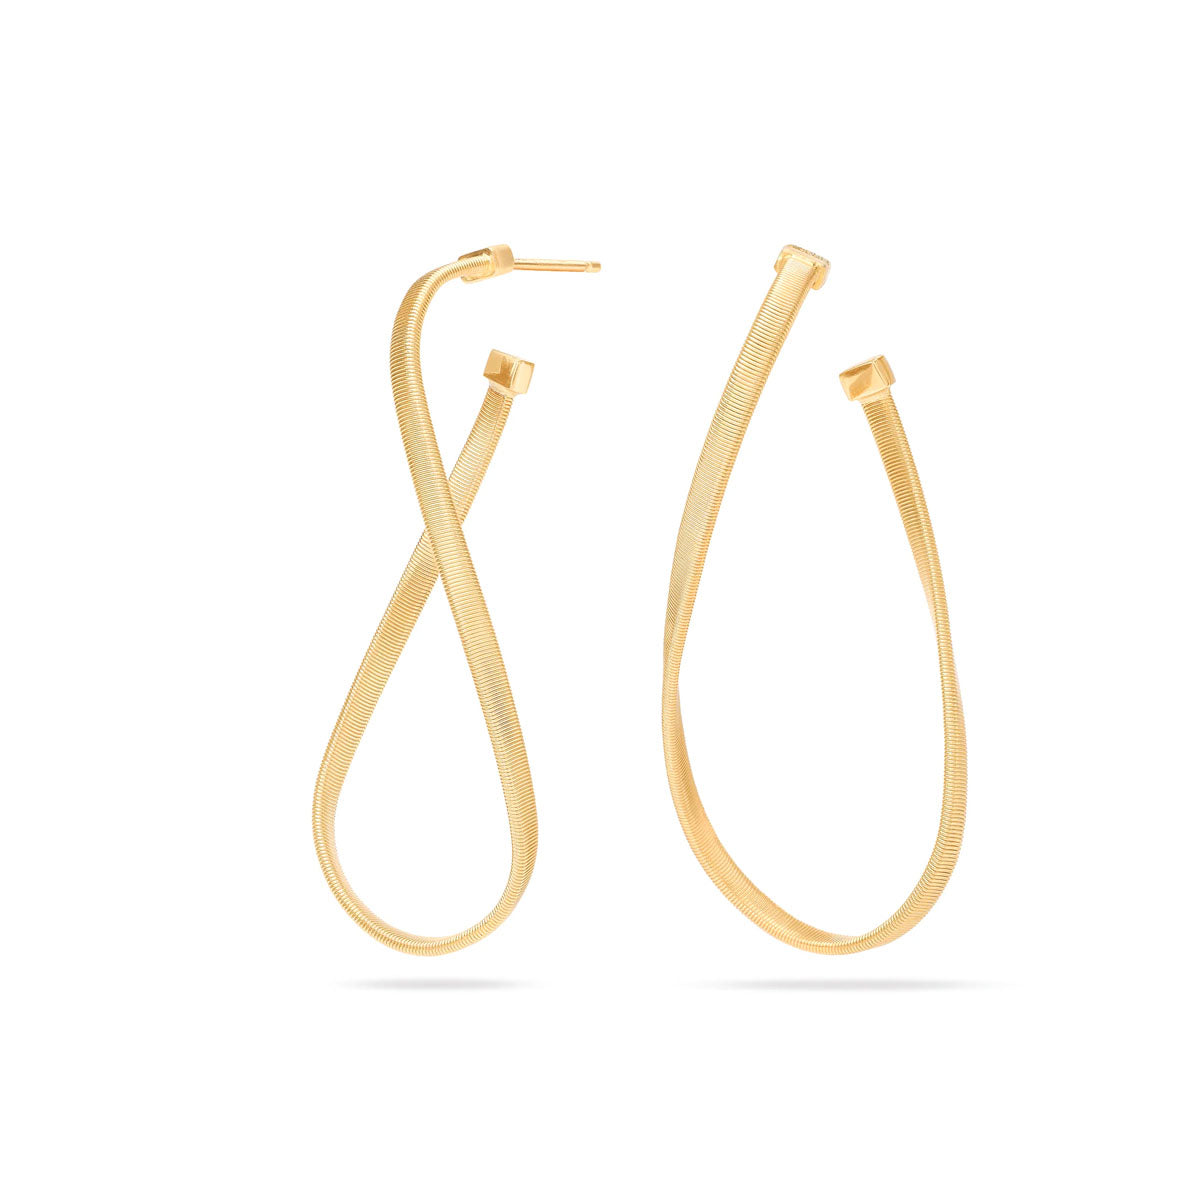 18K Yellow Gold Marrakech Collection Twisted Medium Hoop Earrings Earrings Marco Bicego